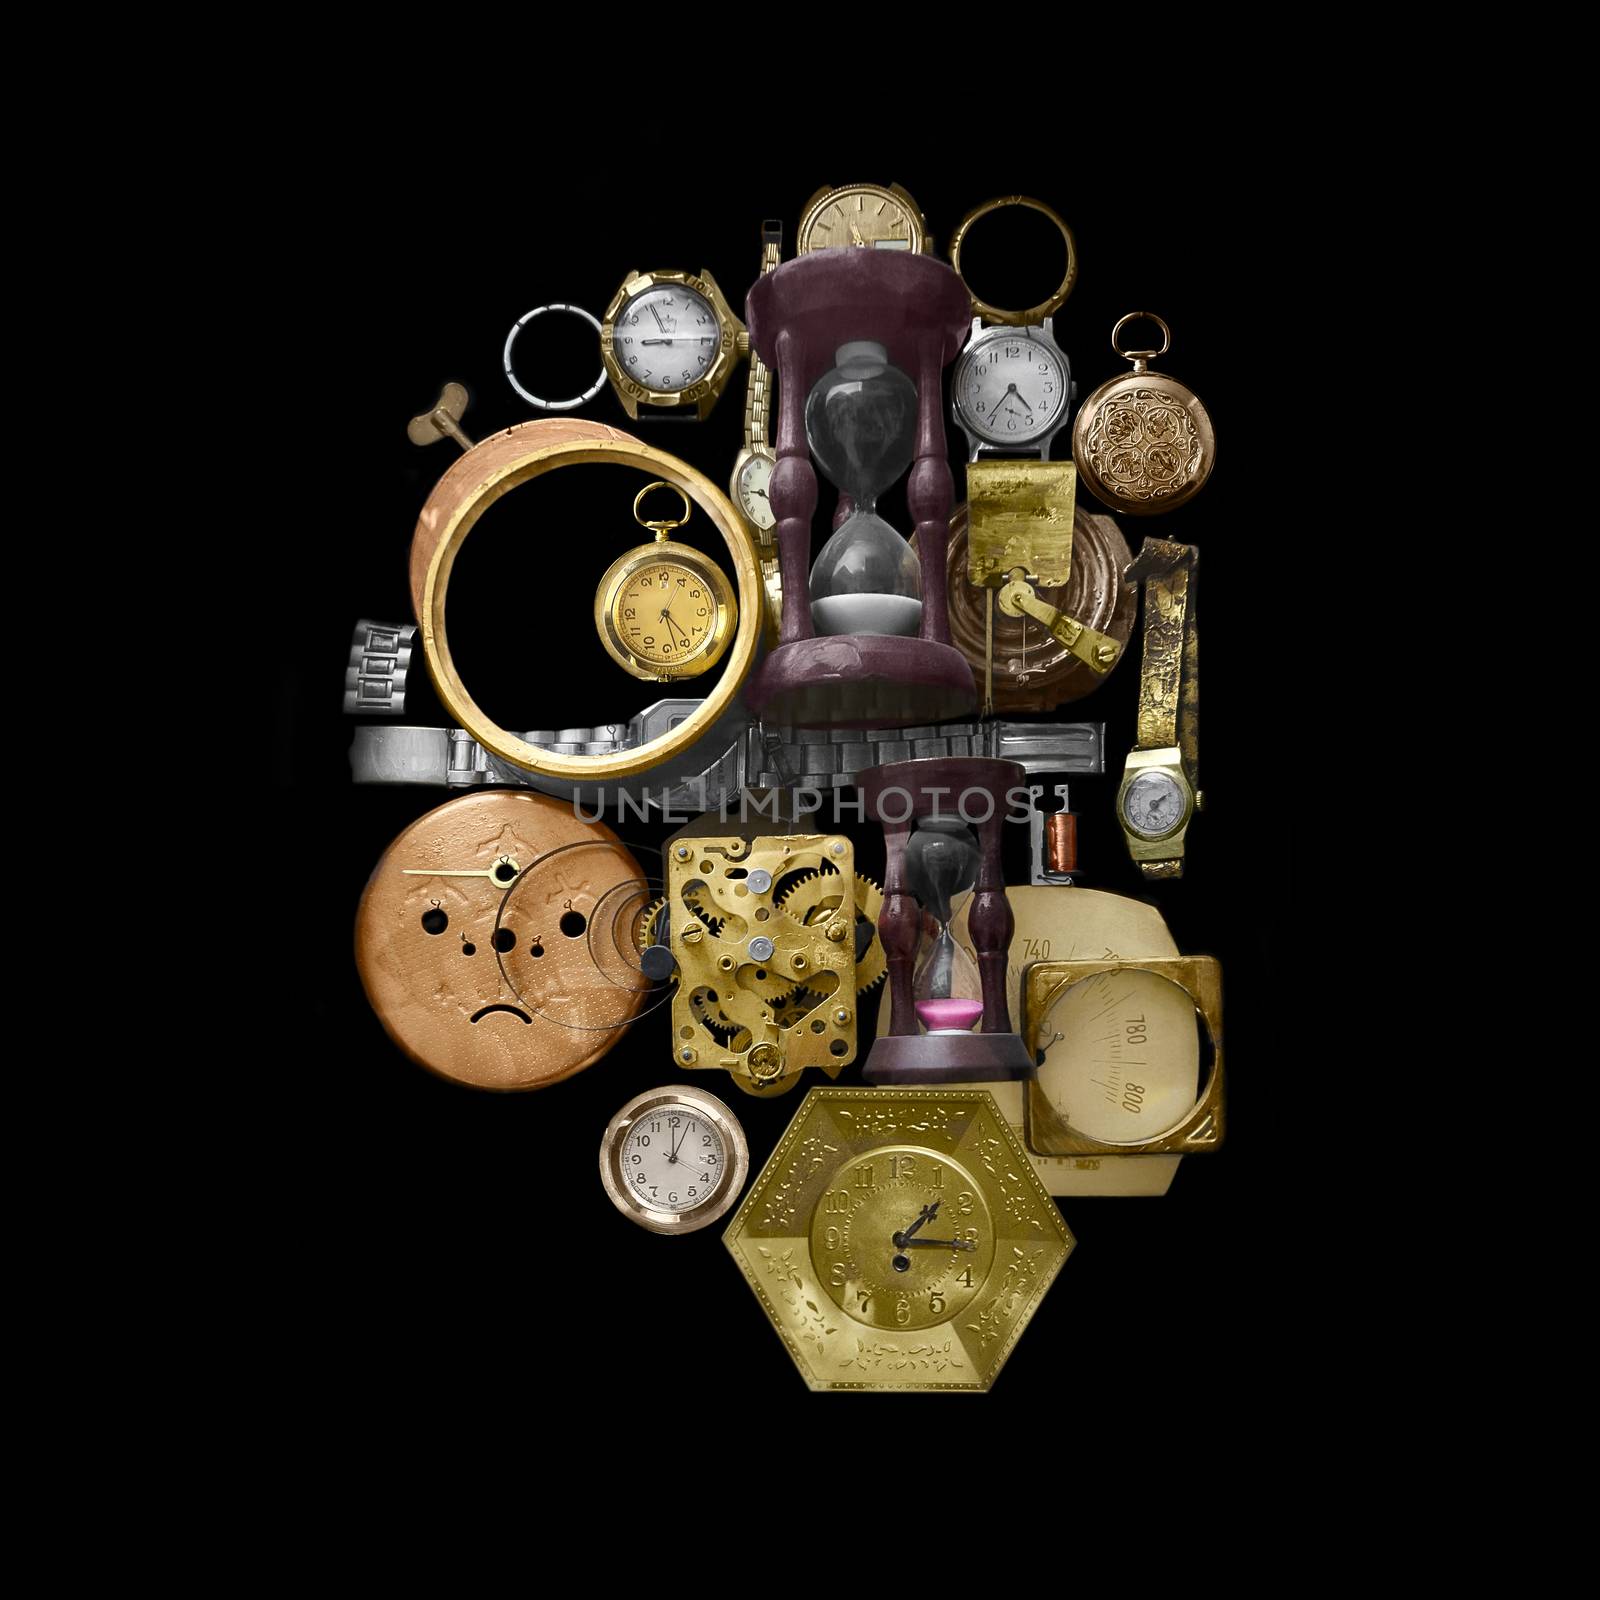 Many old watches and the details on the wall, on a black background. Hourglasses and mechanical clocks, whole and disassembled.